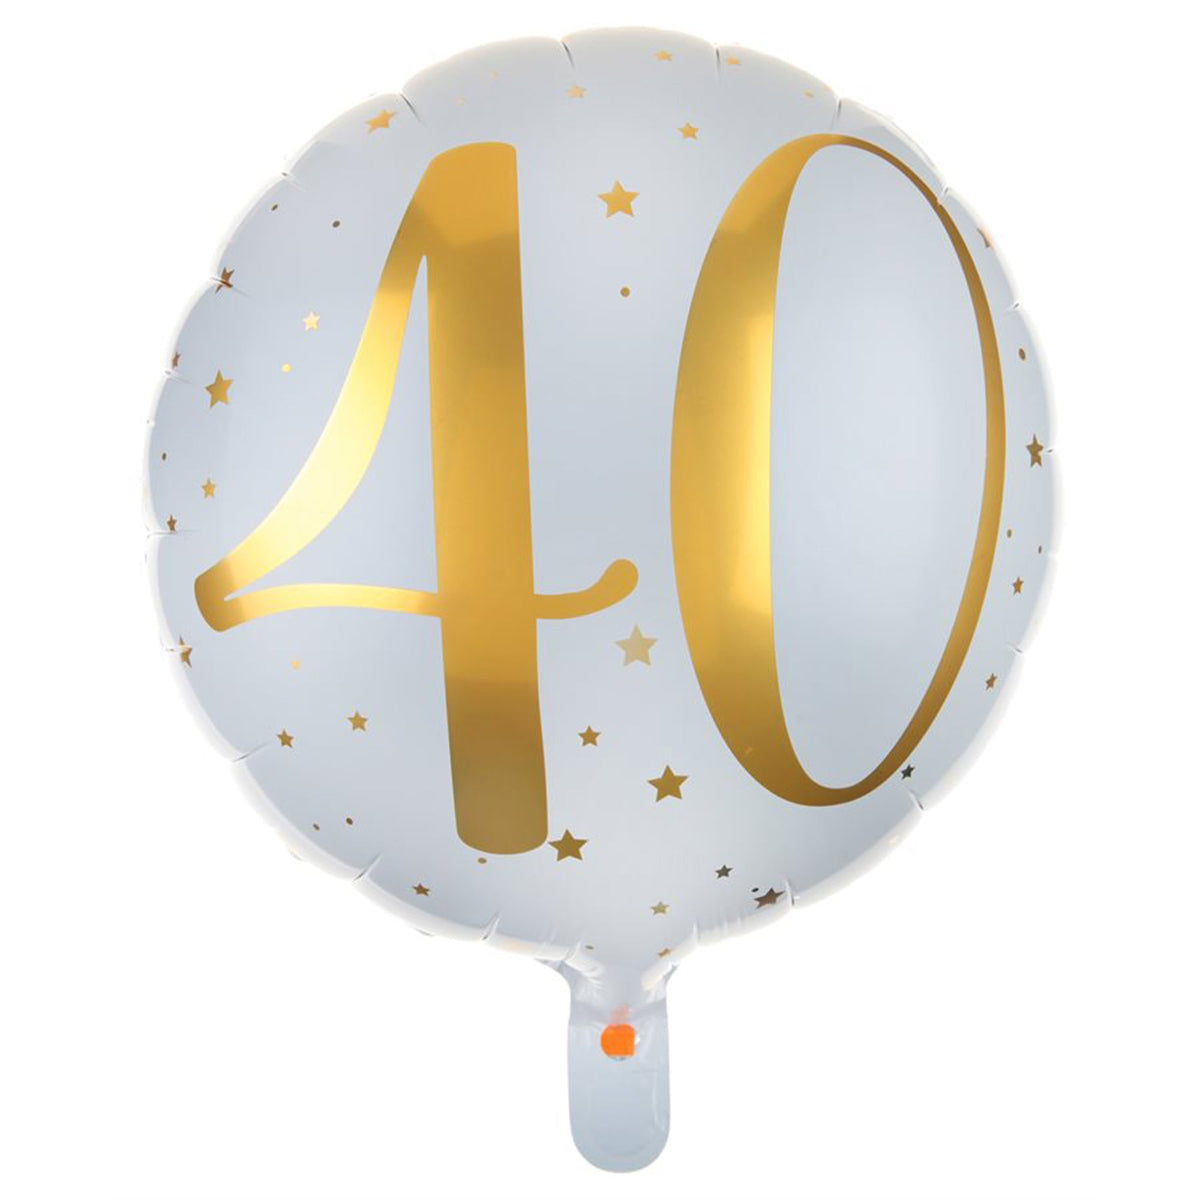 LE GROUPE BLC INTL INC Balloons Gold Trendy Age 40th Birthday Foil Balloon, 18 Inches, 1 Count 3660380045045